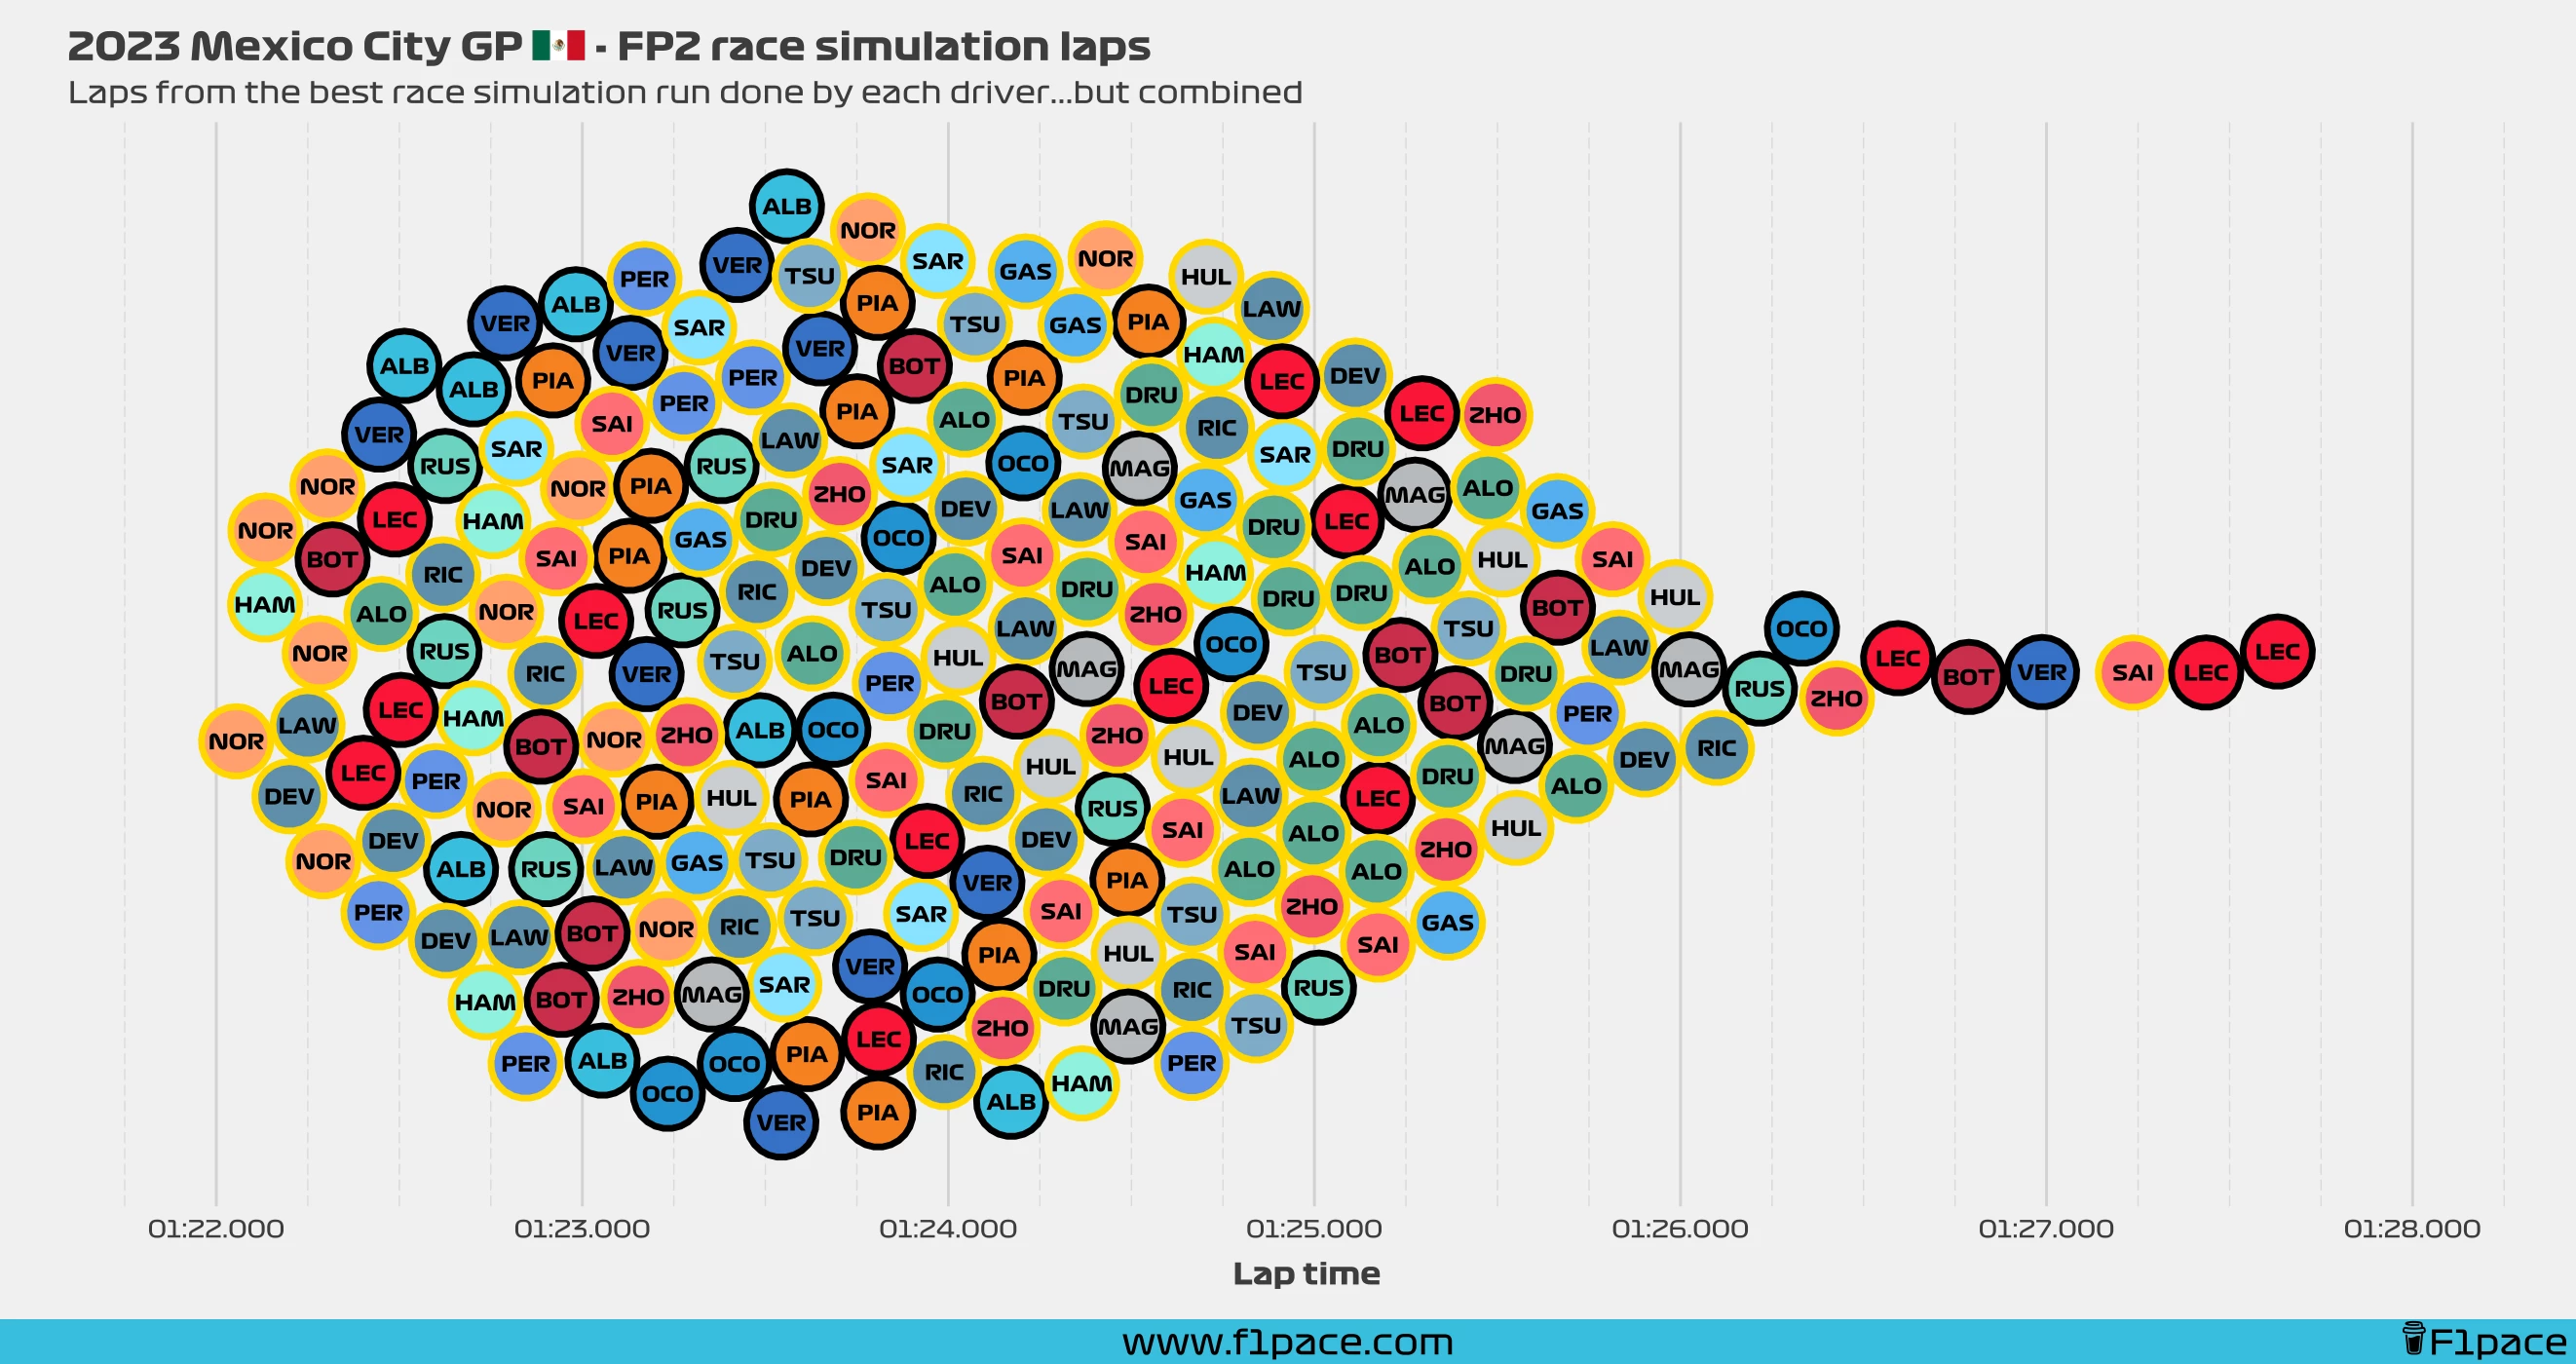 Race simulation laps: All the laps!